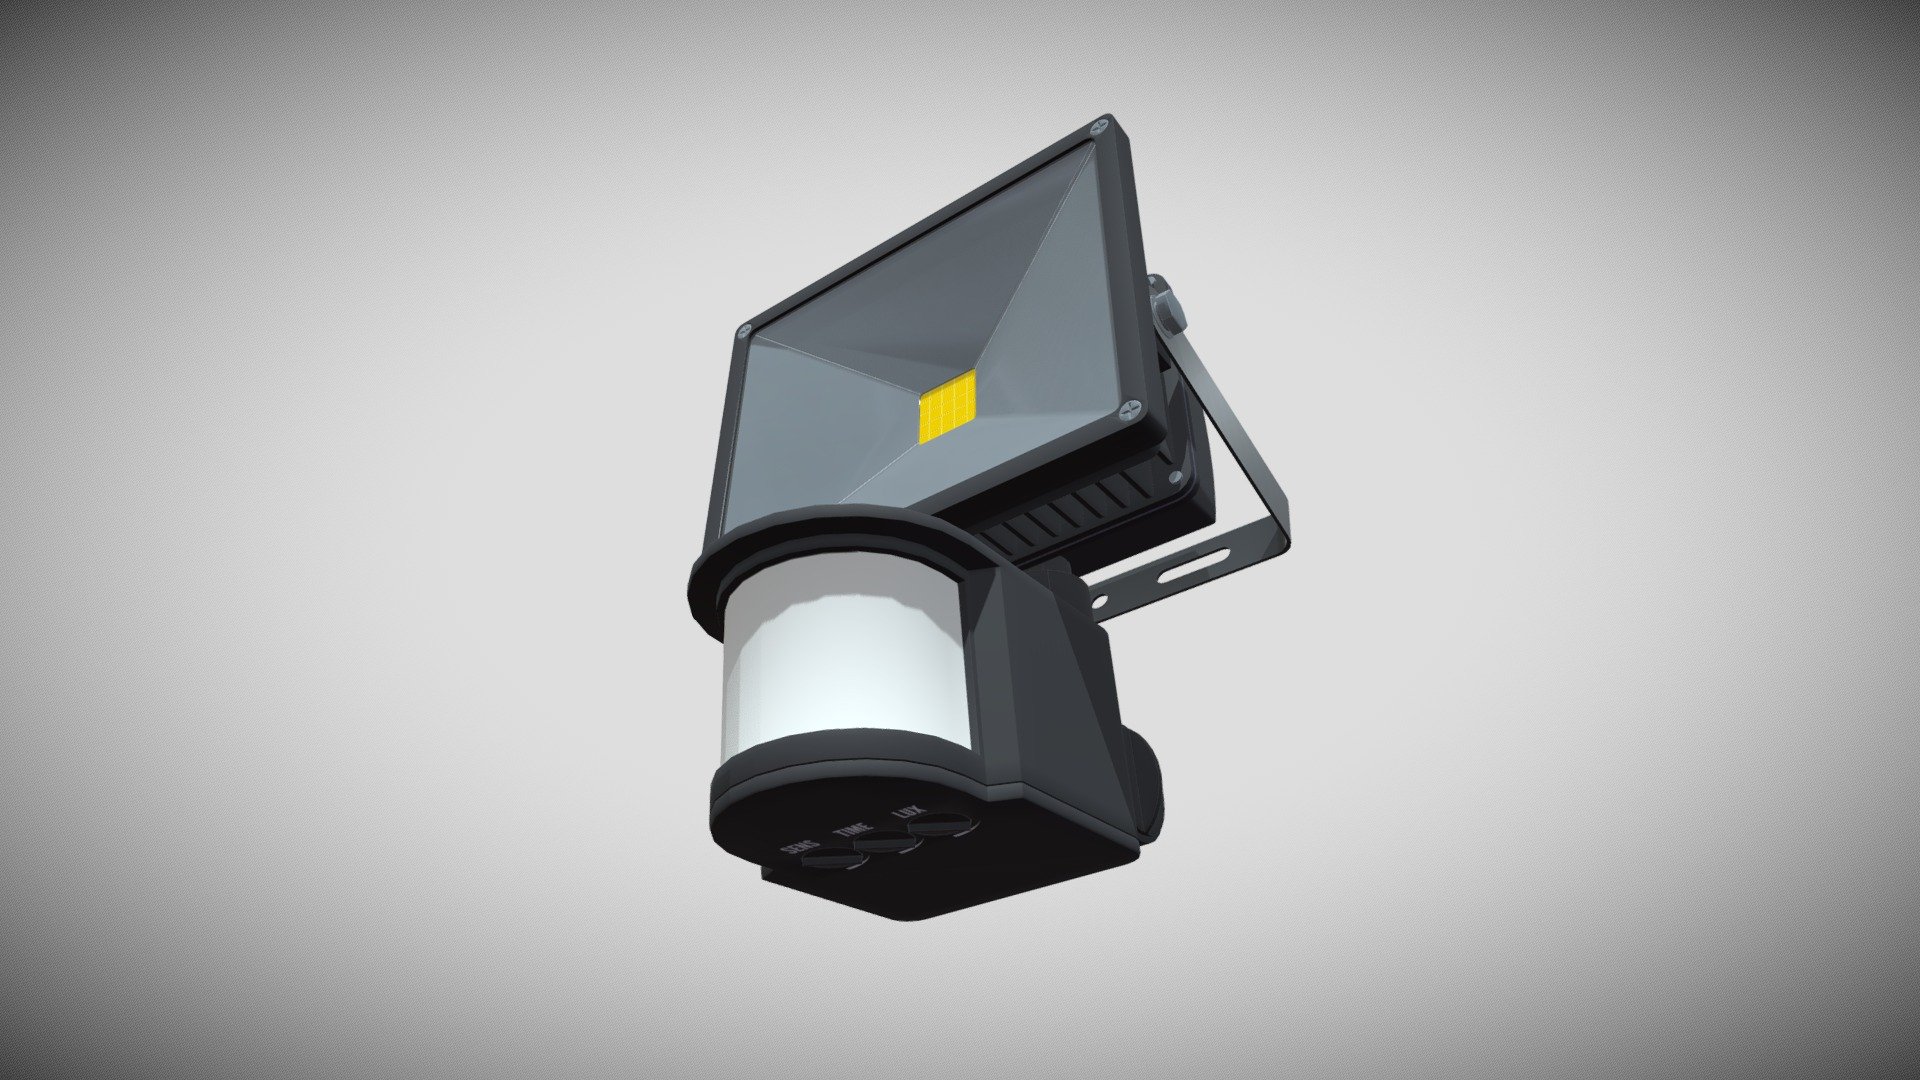 Detailed model of an LED Floodlight With Motion Sensor, modeled in Cinema 4D.The model was created using approximate real world dimensions.

The model has 14,623 polys and 14,315 vertices.

An additional file has been provided containing the original Cinema 4D project file, textures and other 3d export files such as 3ds, fbx and obj 3d model